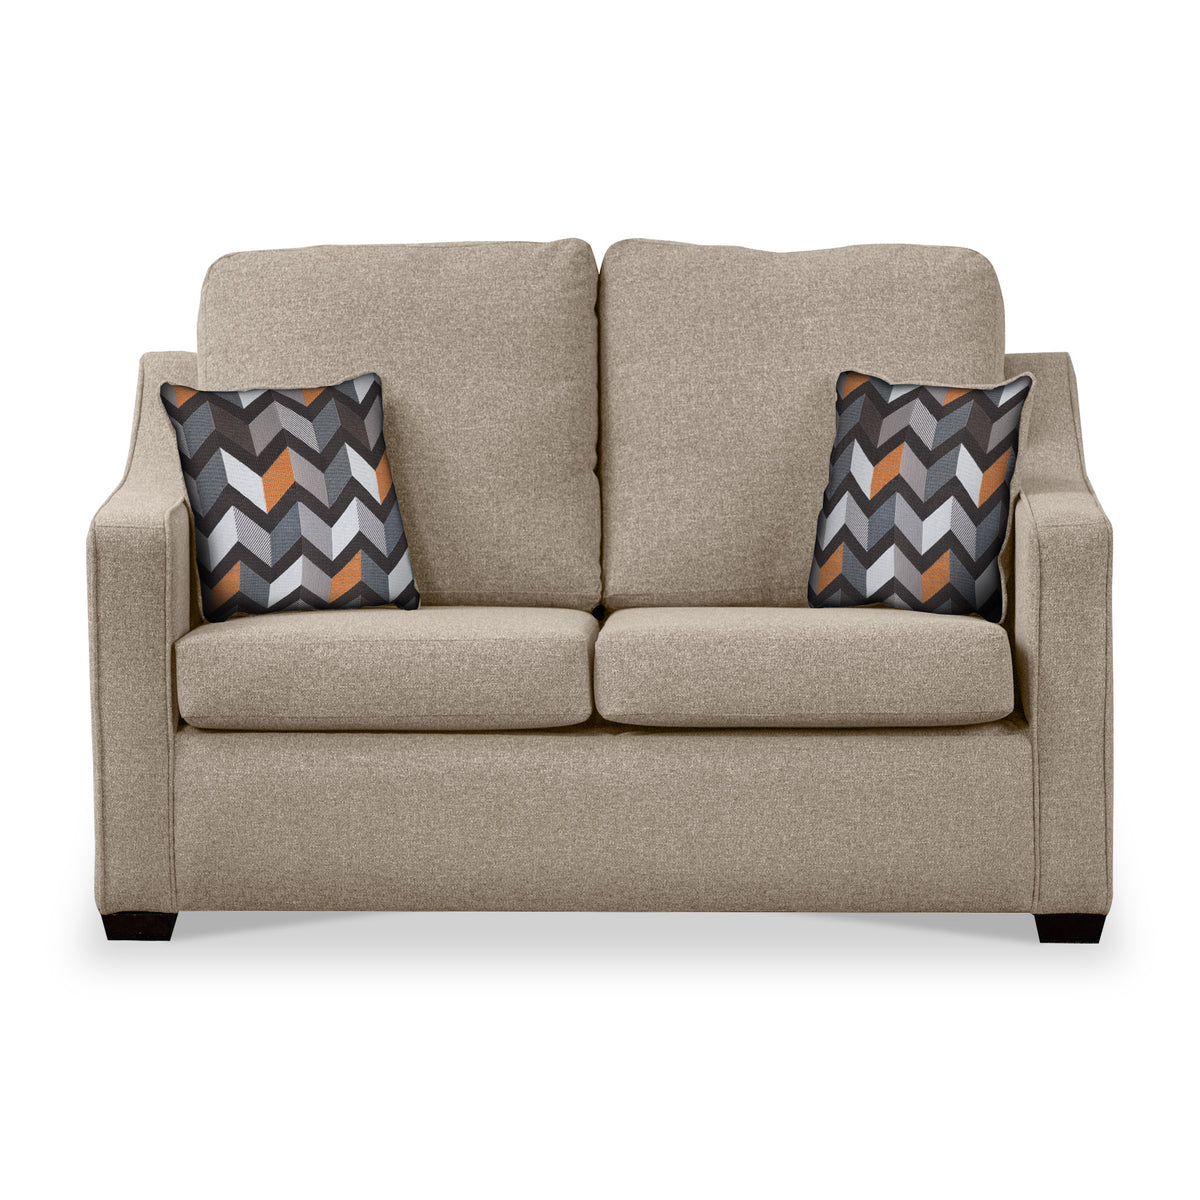 Charlcote Oatmeal Faux Linen 2 Seater Sofabed with Charcoal Scatter Cushions from Roseland Furniture